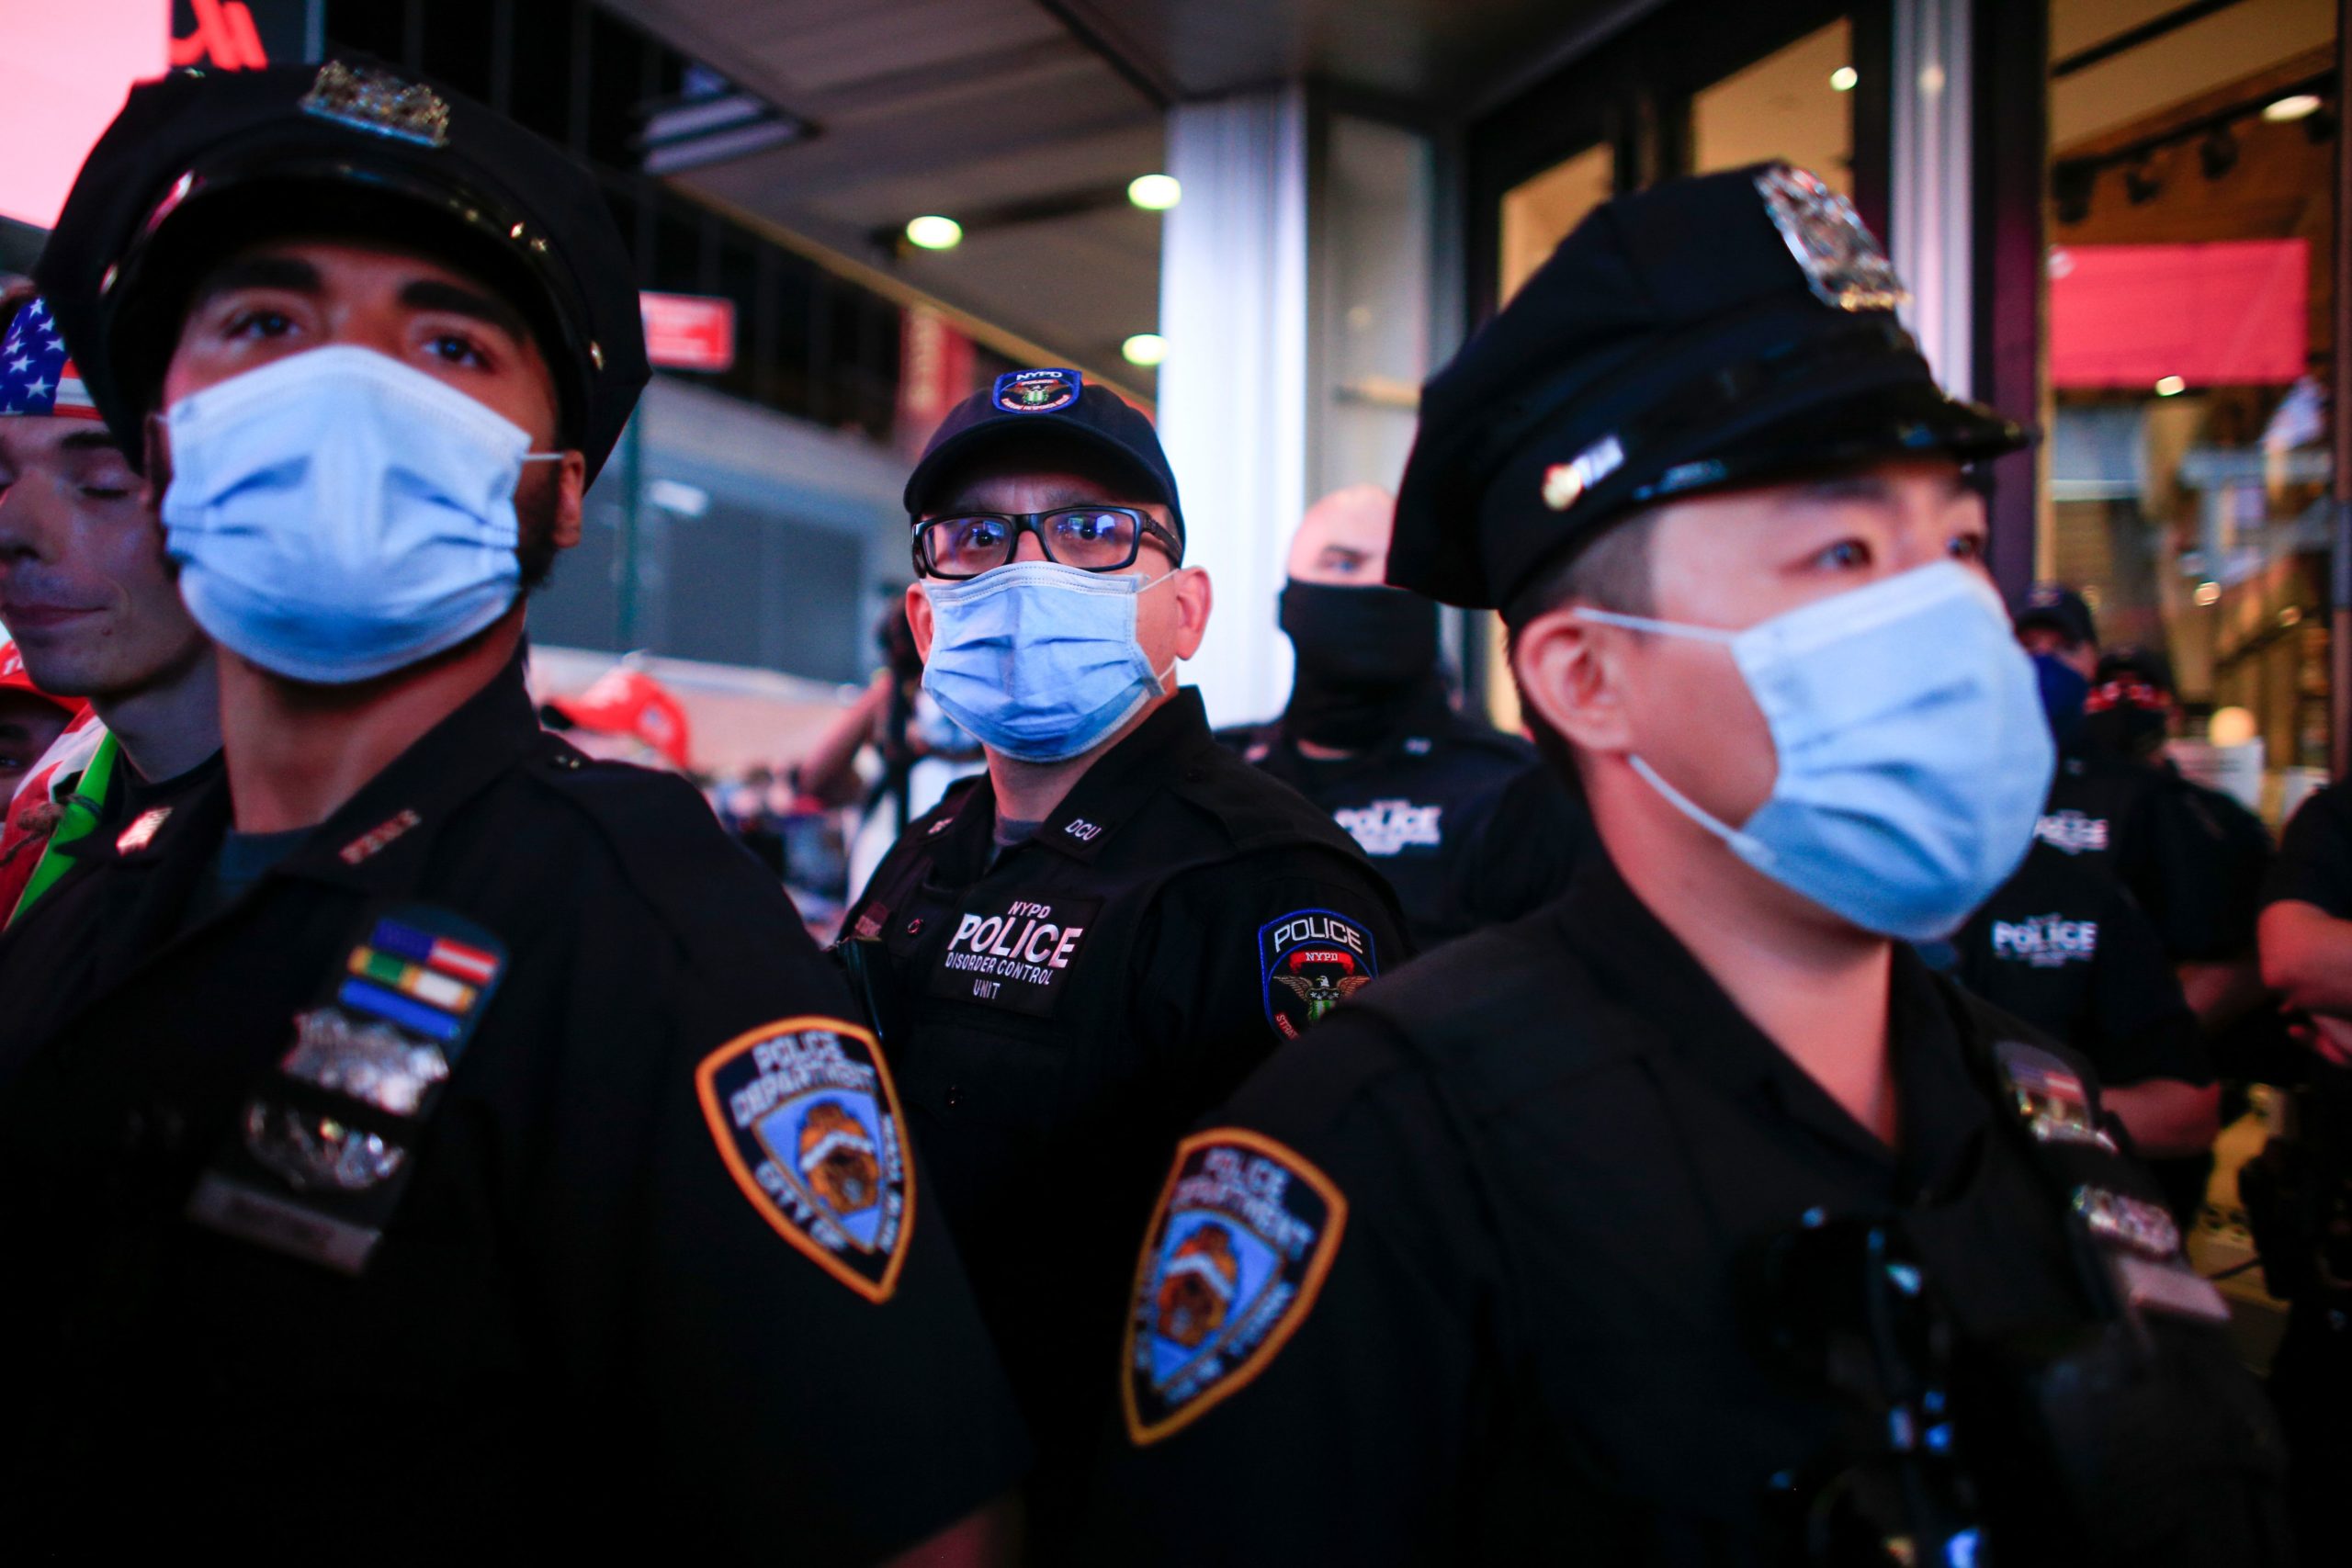 NYPD officers stand guard during a protest to demand justice for Daniel Prude, on September 3, 2020 in New York City. - Protests were planned in New York September 3 over the death of Daniel Prude, a black man that police hooded and forced face down on the road, according to video footage that prompted a probe from the state's attorney general. (KENA BETANCUR/AFP via Getty Images)